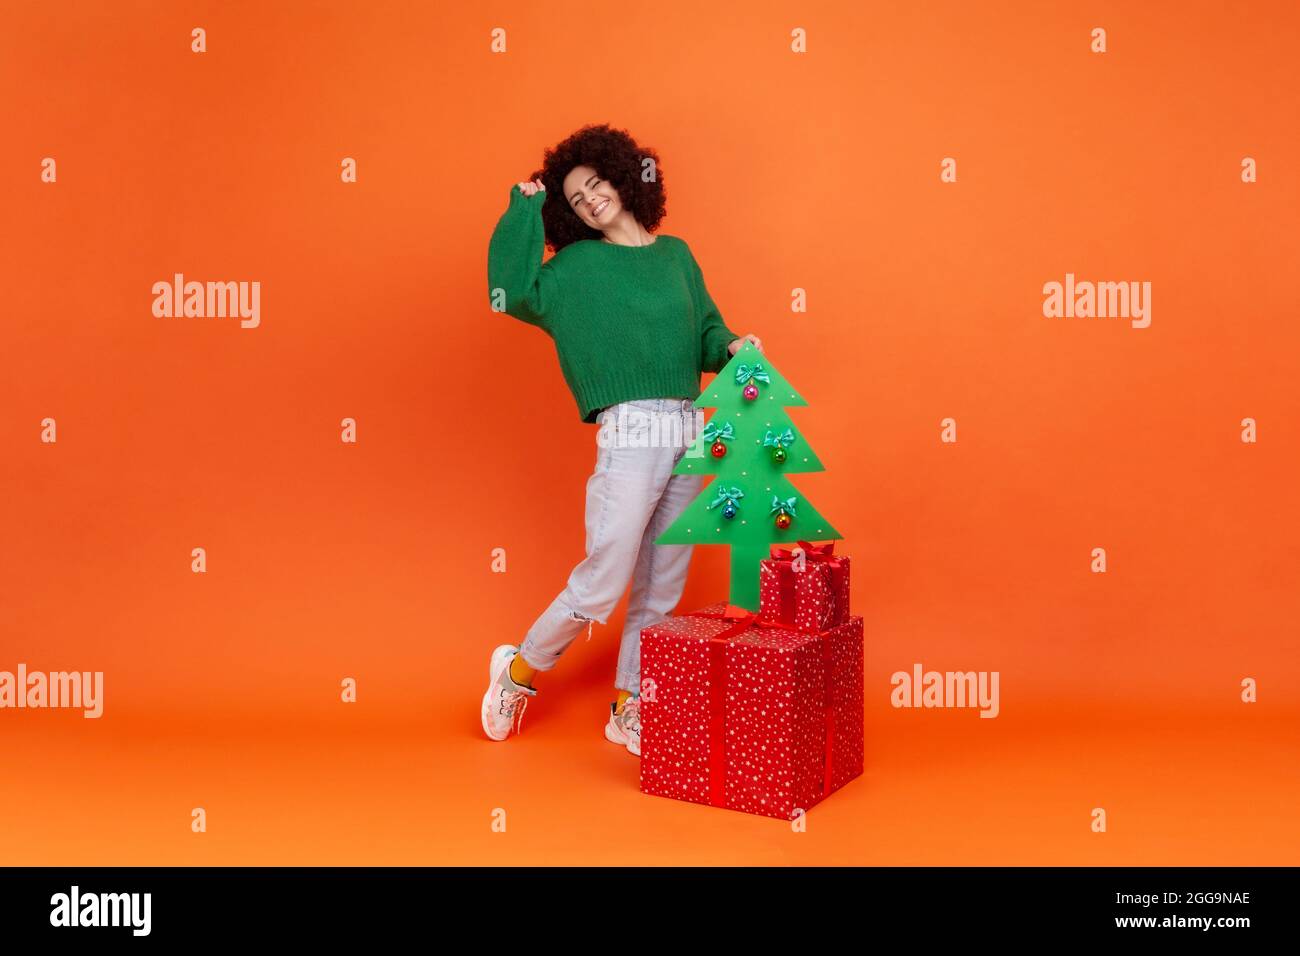 Full length portrait of woman with curly hair in green casual style sweater standing with present boxes and decorative Christmas tree, celebrating. In Stock Photo